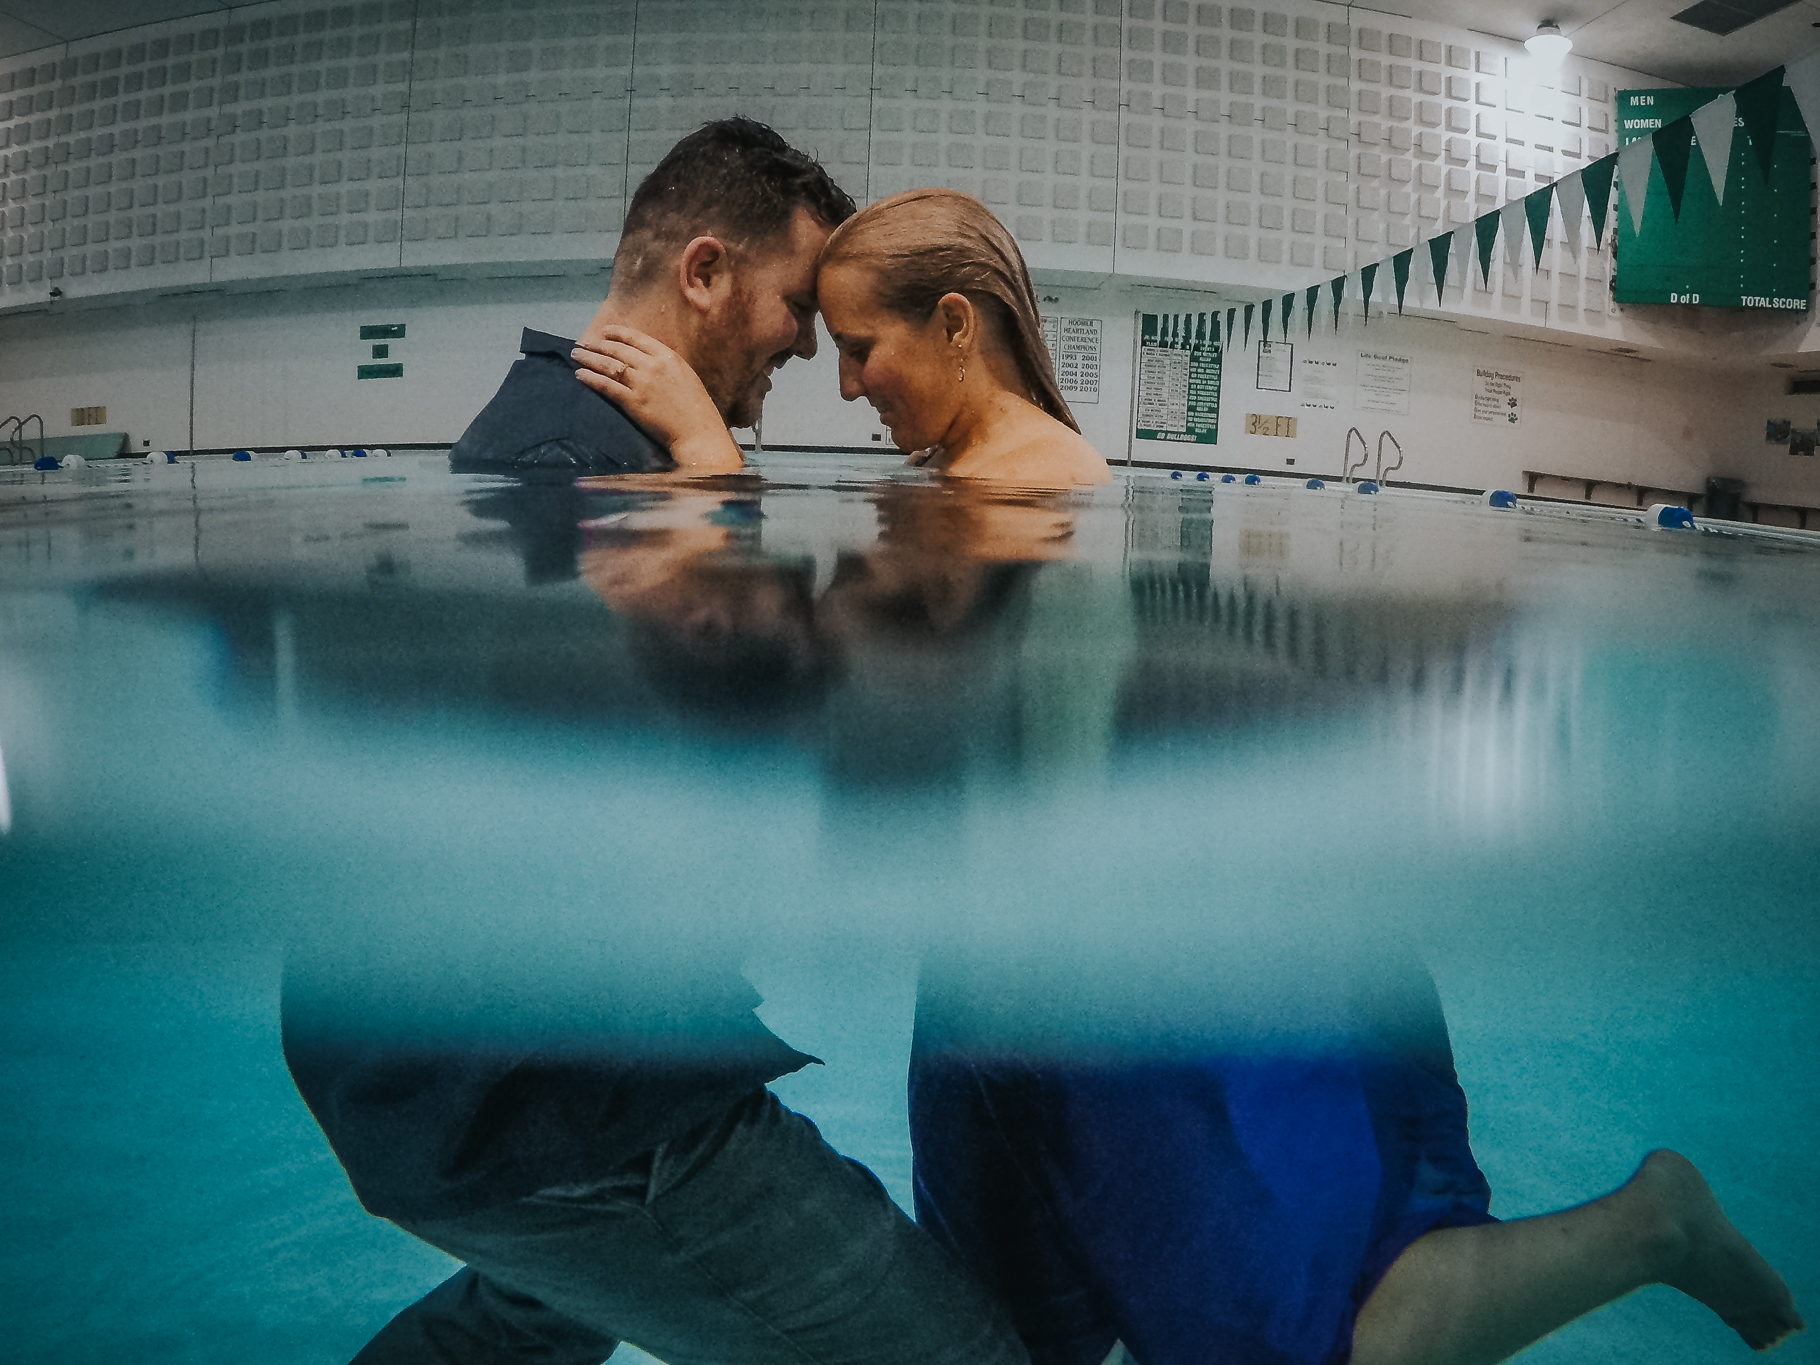 Engagement session in a pool